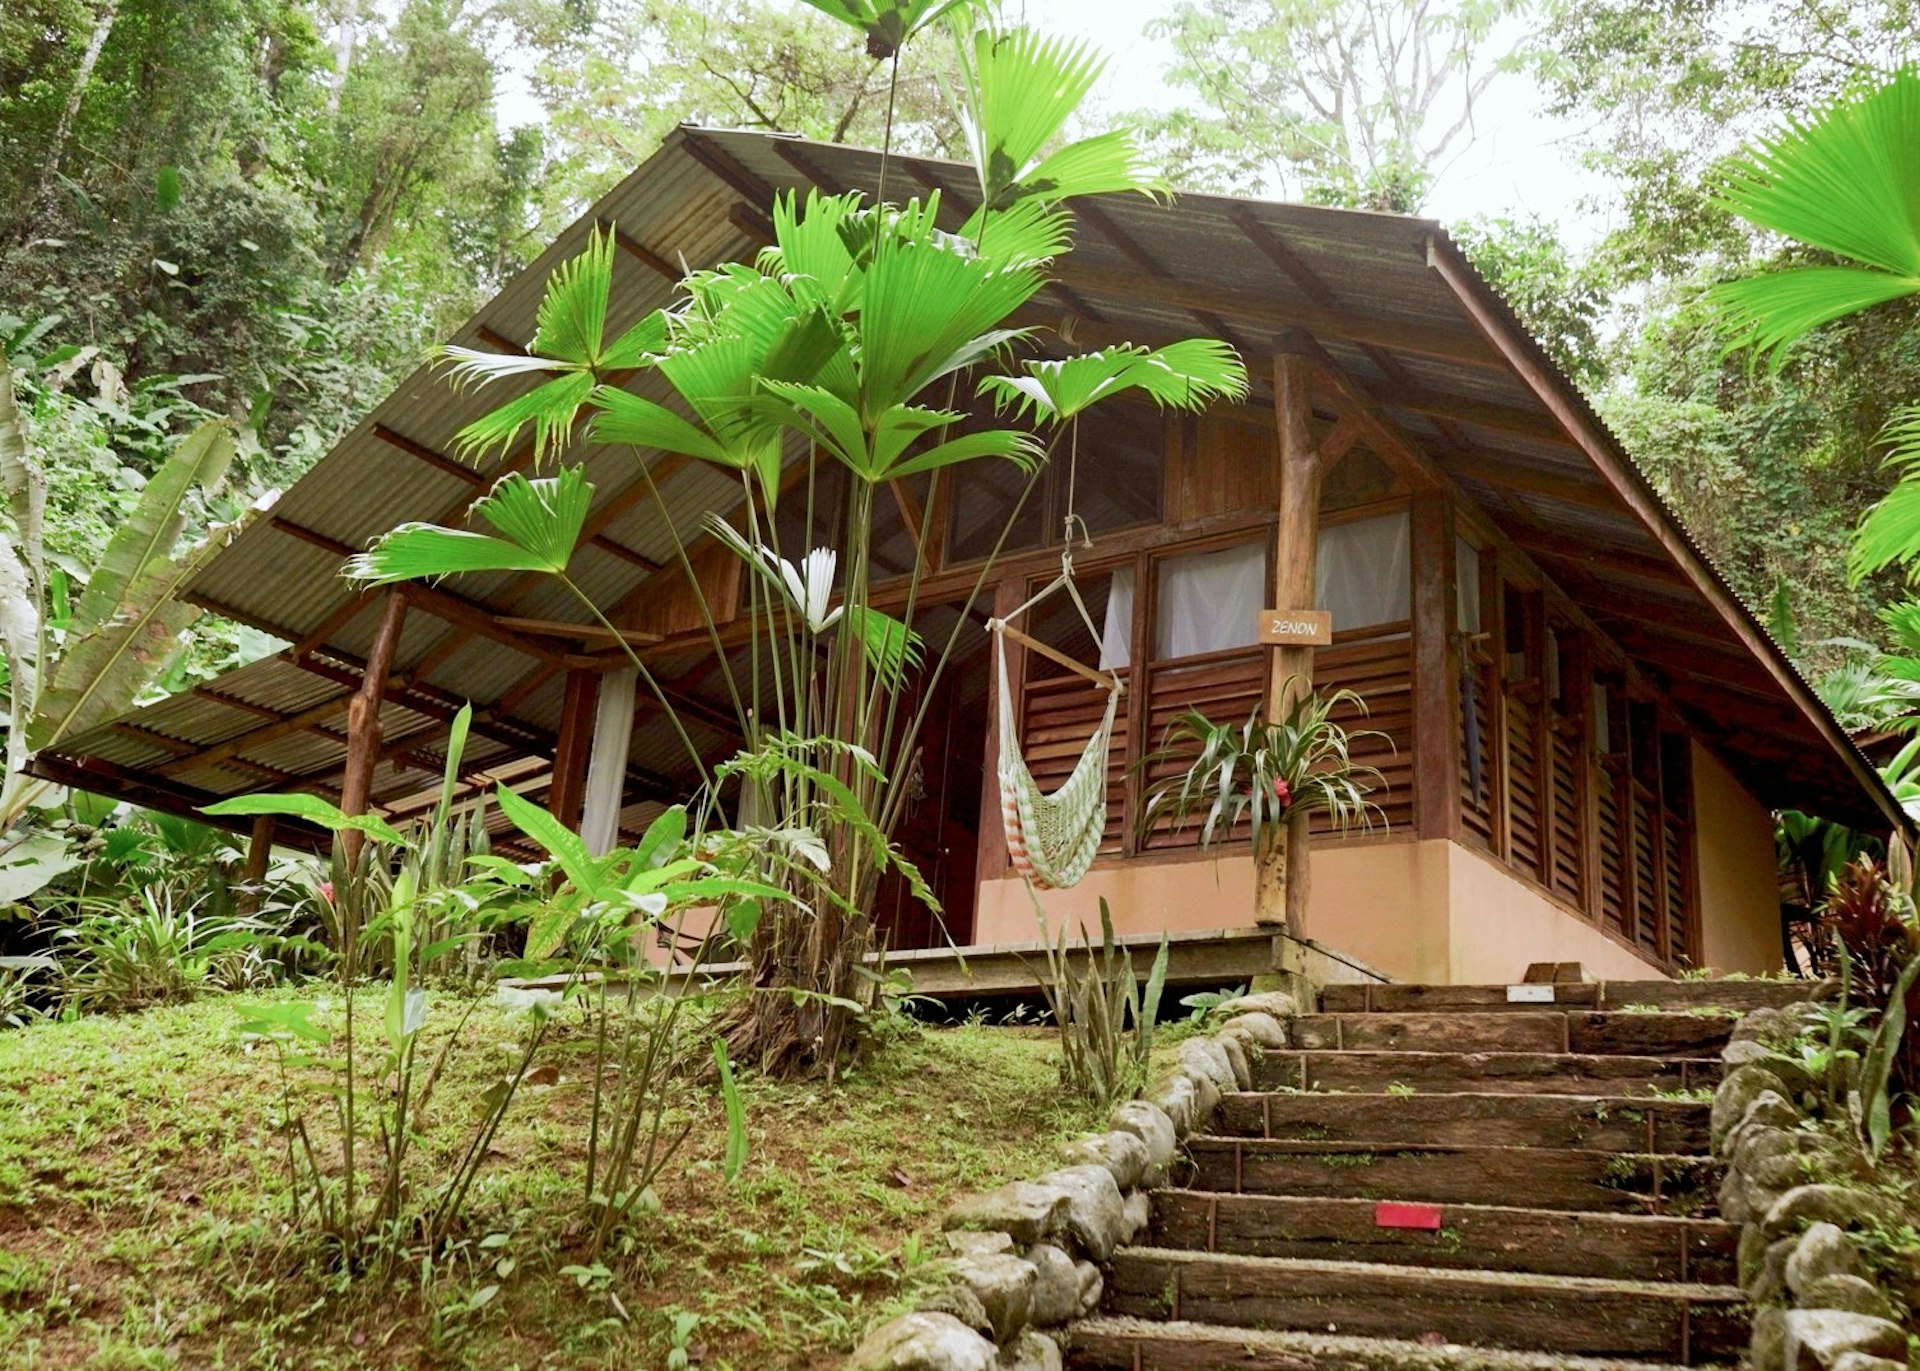 Exterior shot of the wooden Amazonita Ecolodge surrounded by trees in Costa Rica 